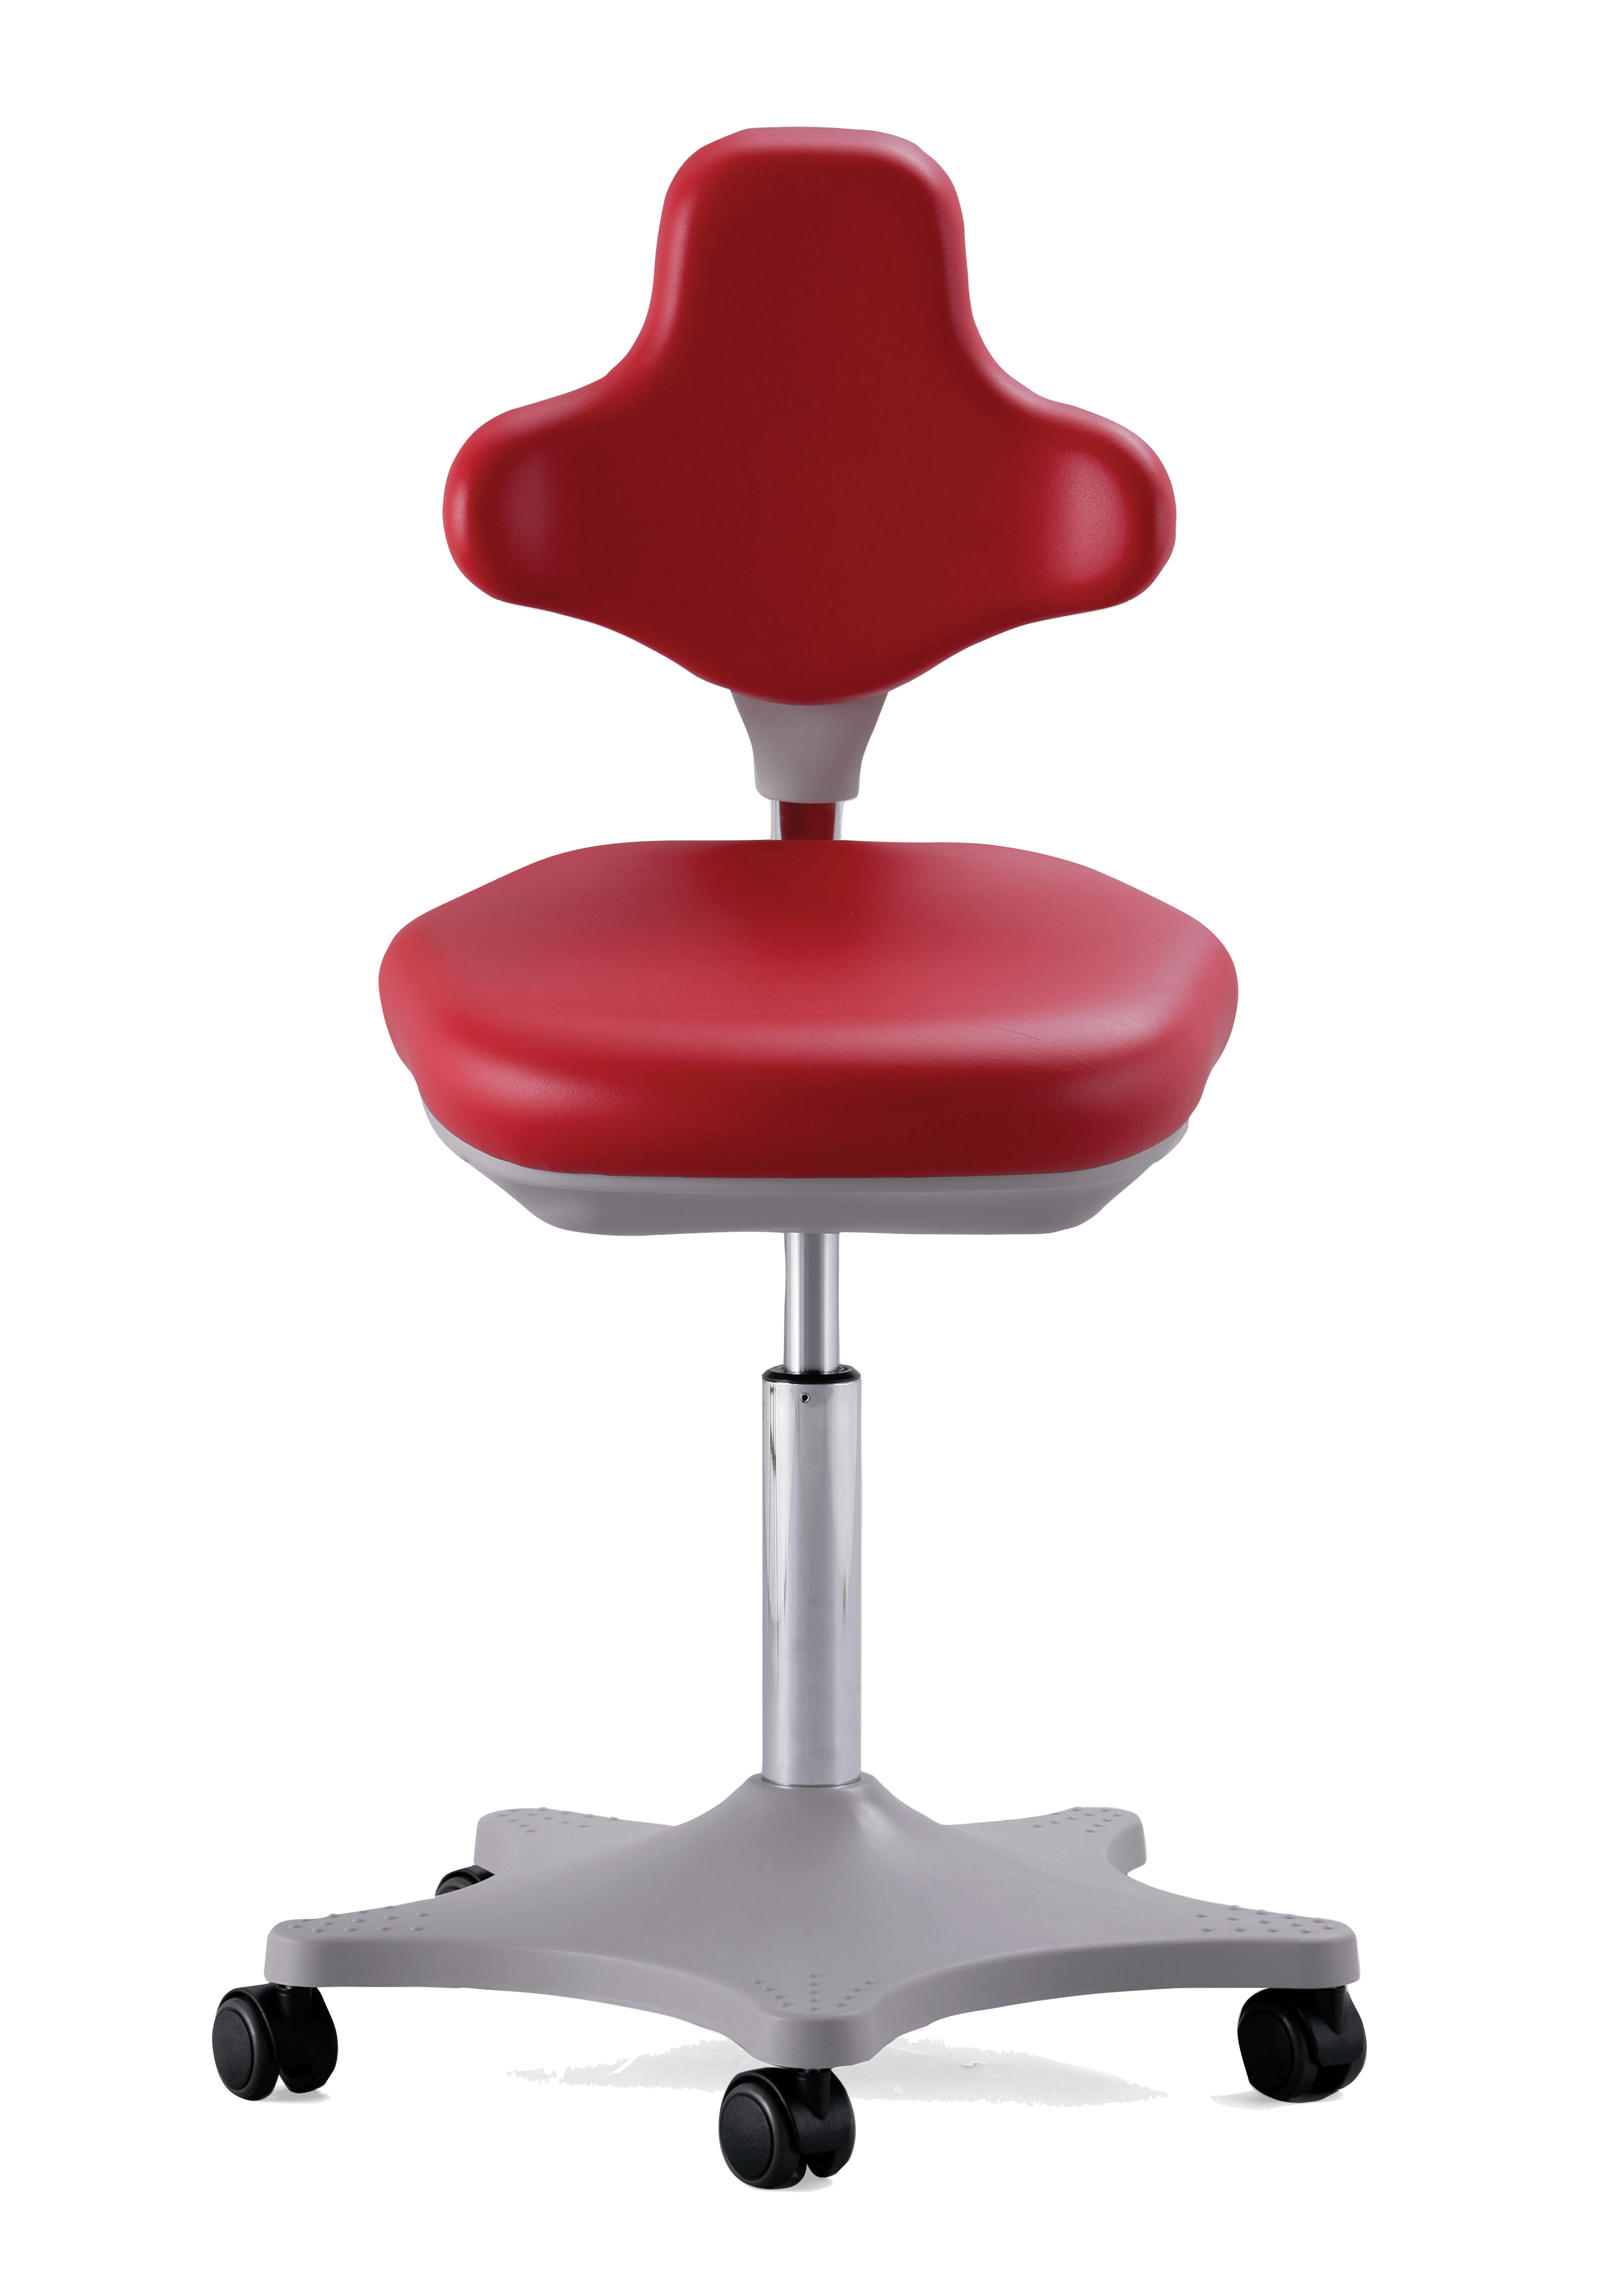 Laboratory chair  Global Stole - a chair exactly for your needs